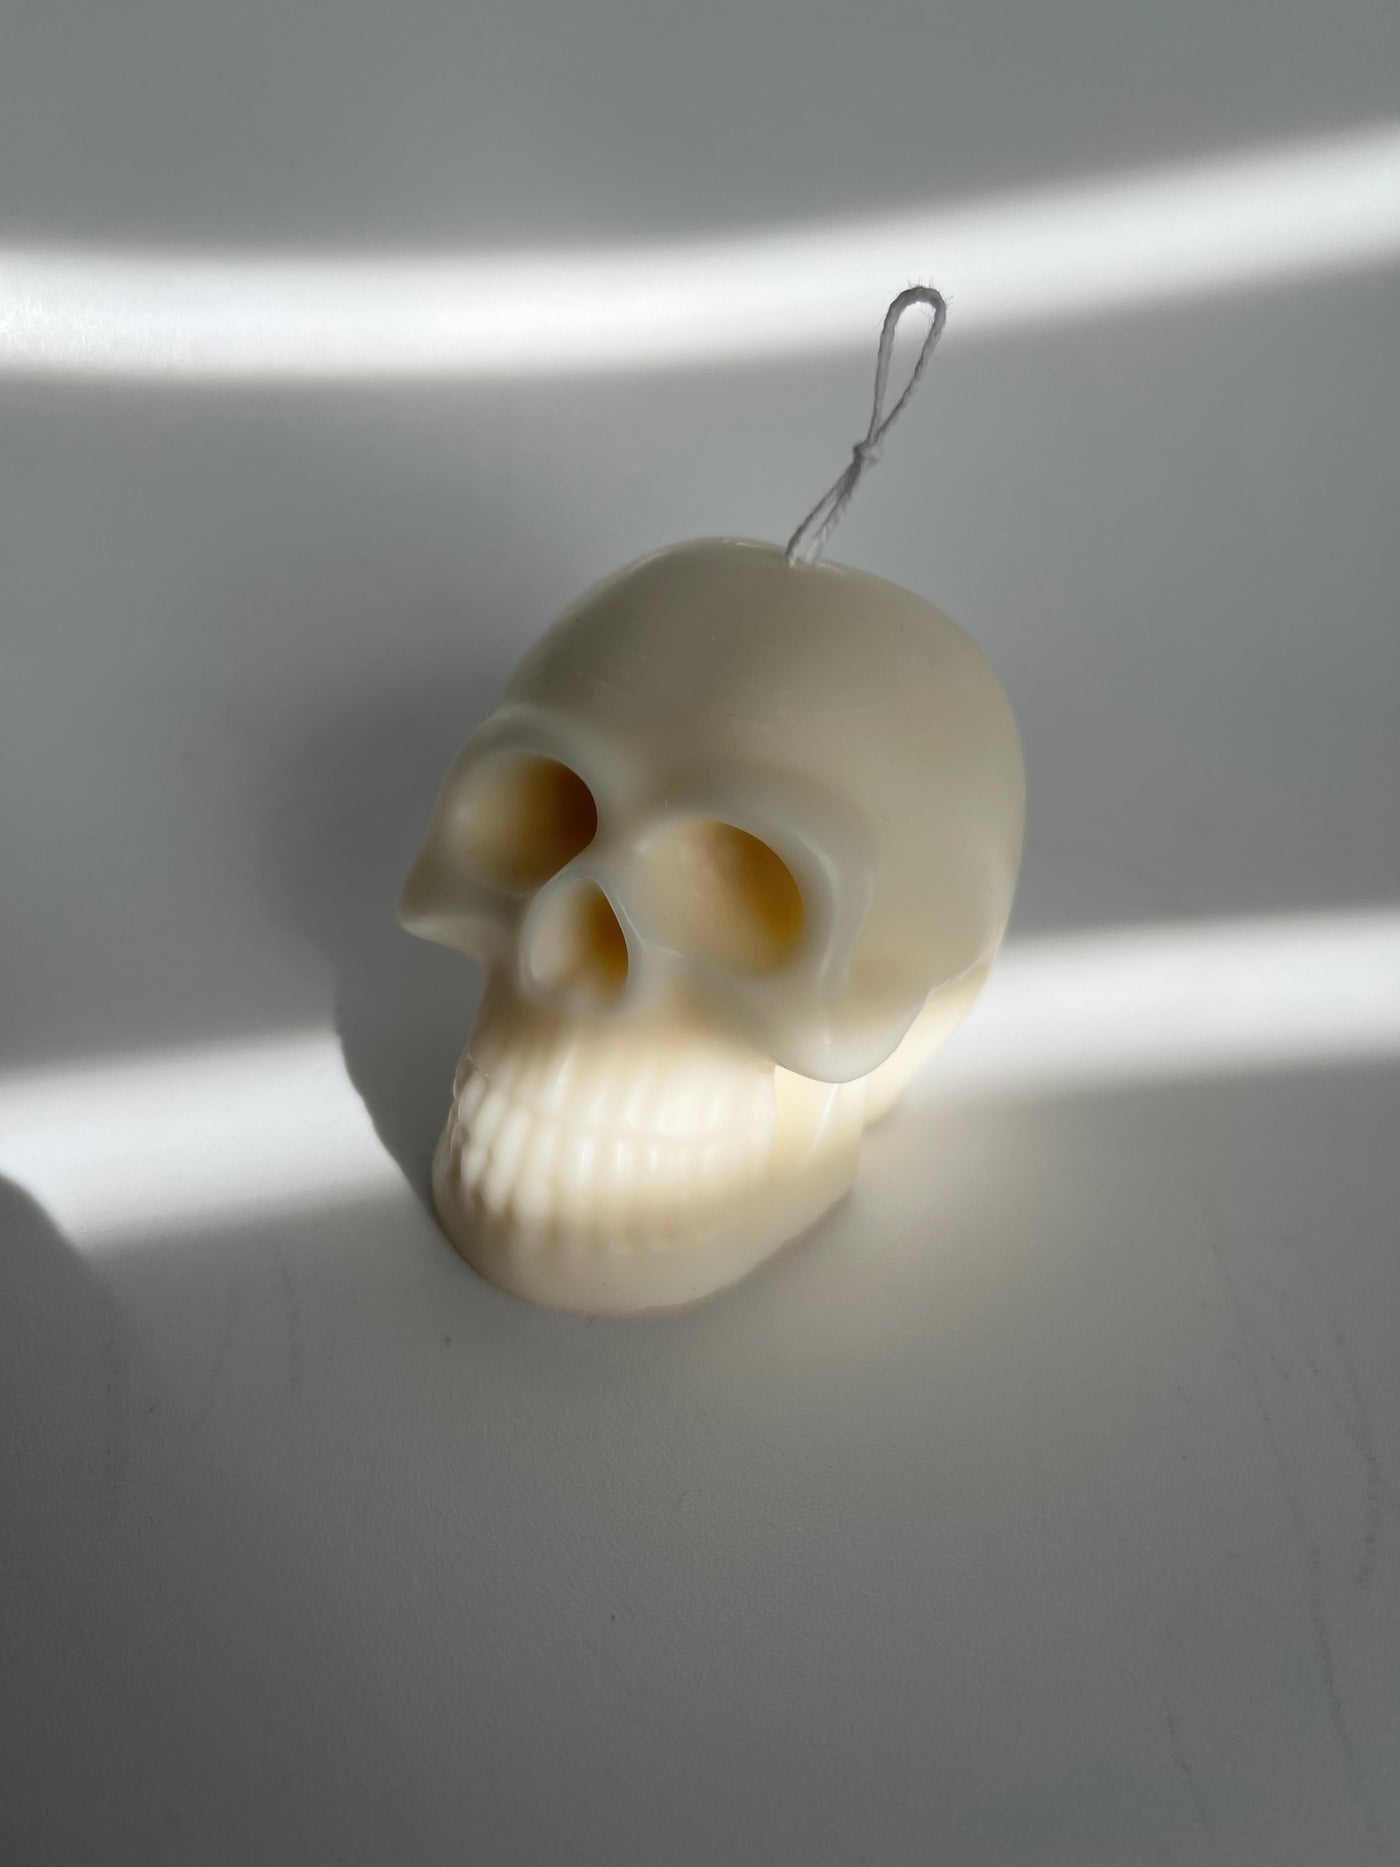 The Skull Candle